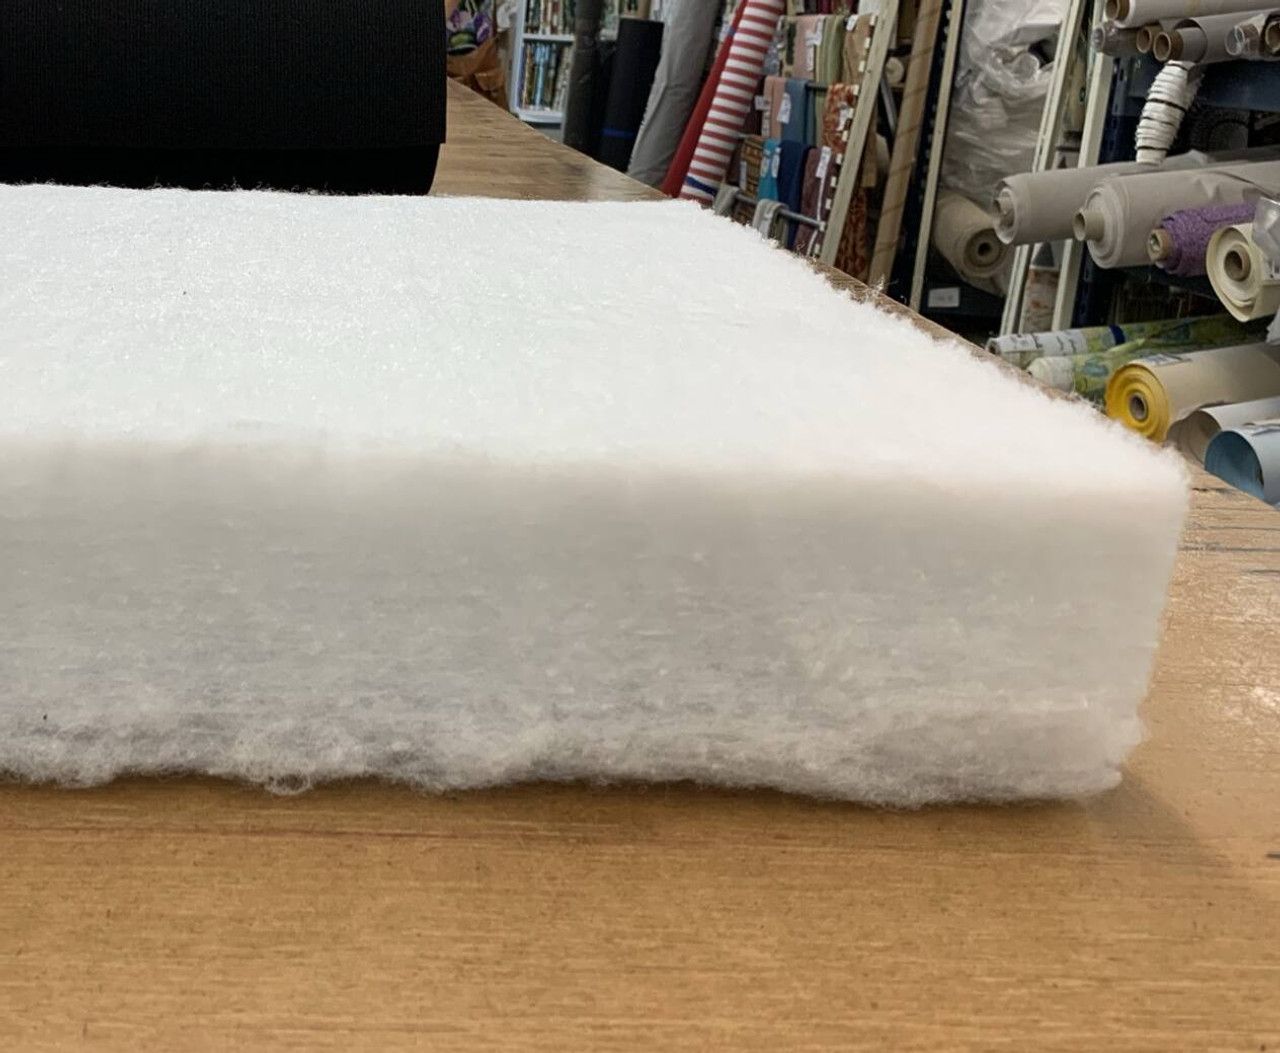 Cheap Upholstery Foam including foam for cushions and seat foam